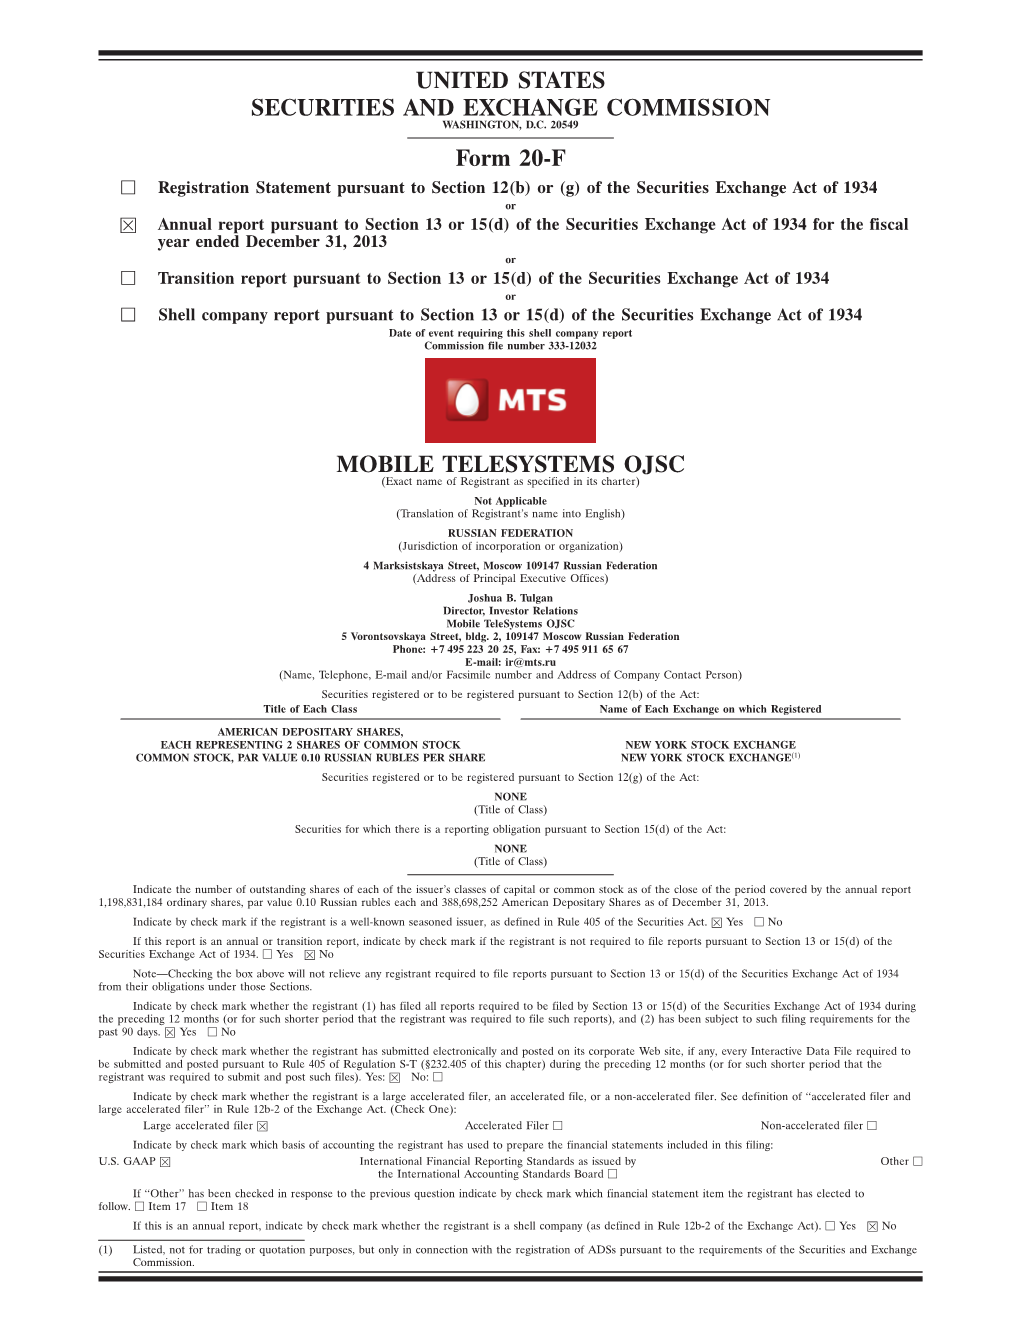 UNITED STATES SECURITIES and EXCHANGE COMMISSION Form 20-F MOBILE TELESYSTEMS OJSC